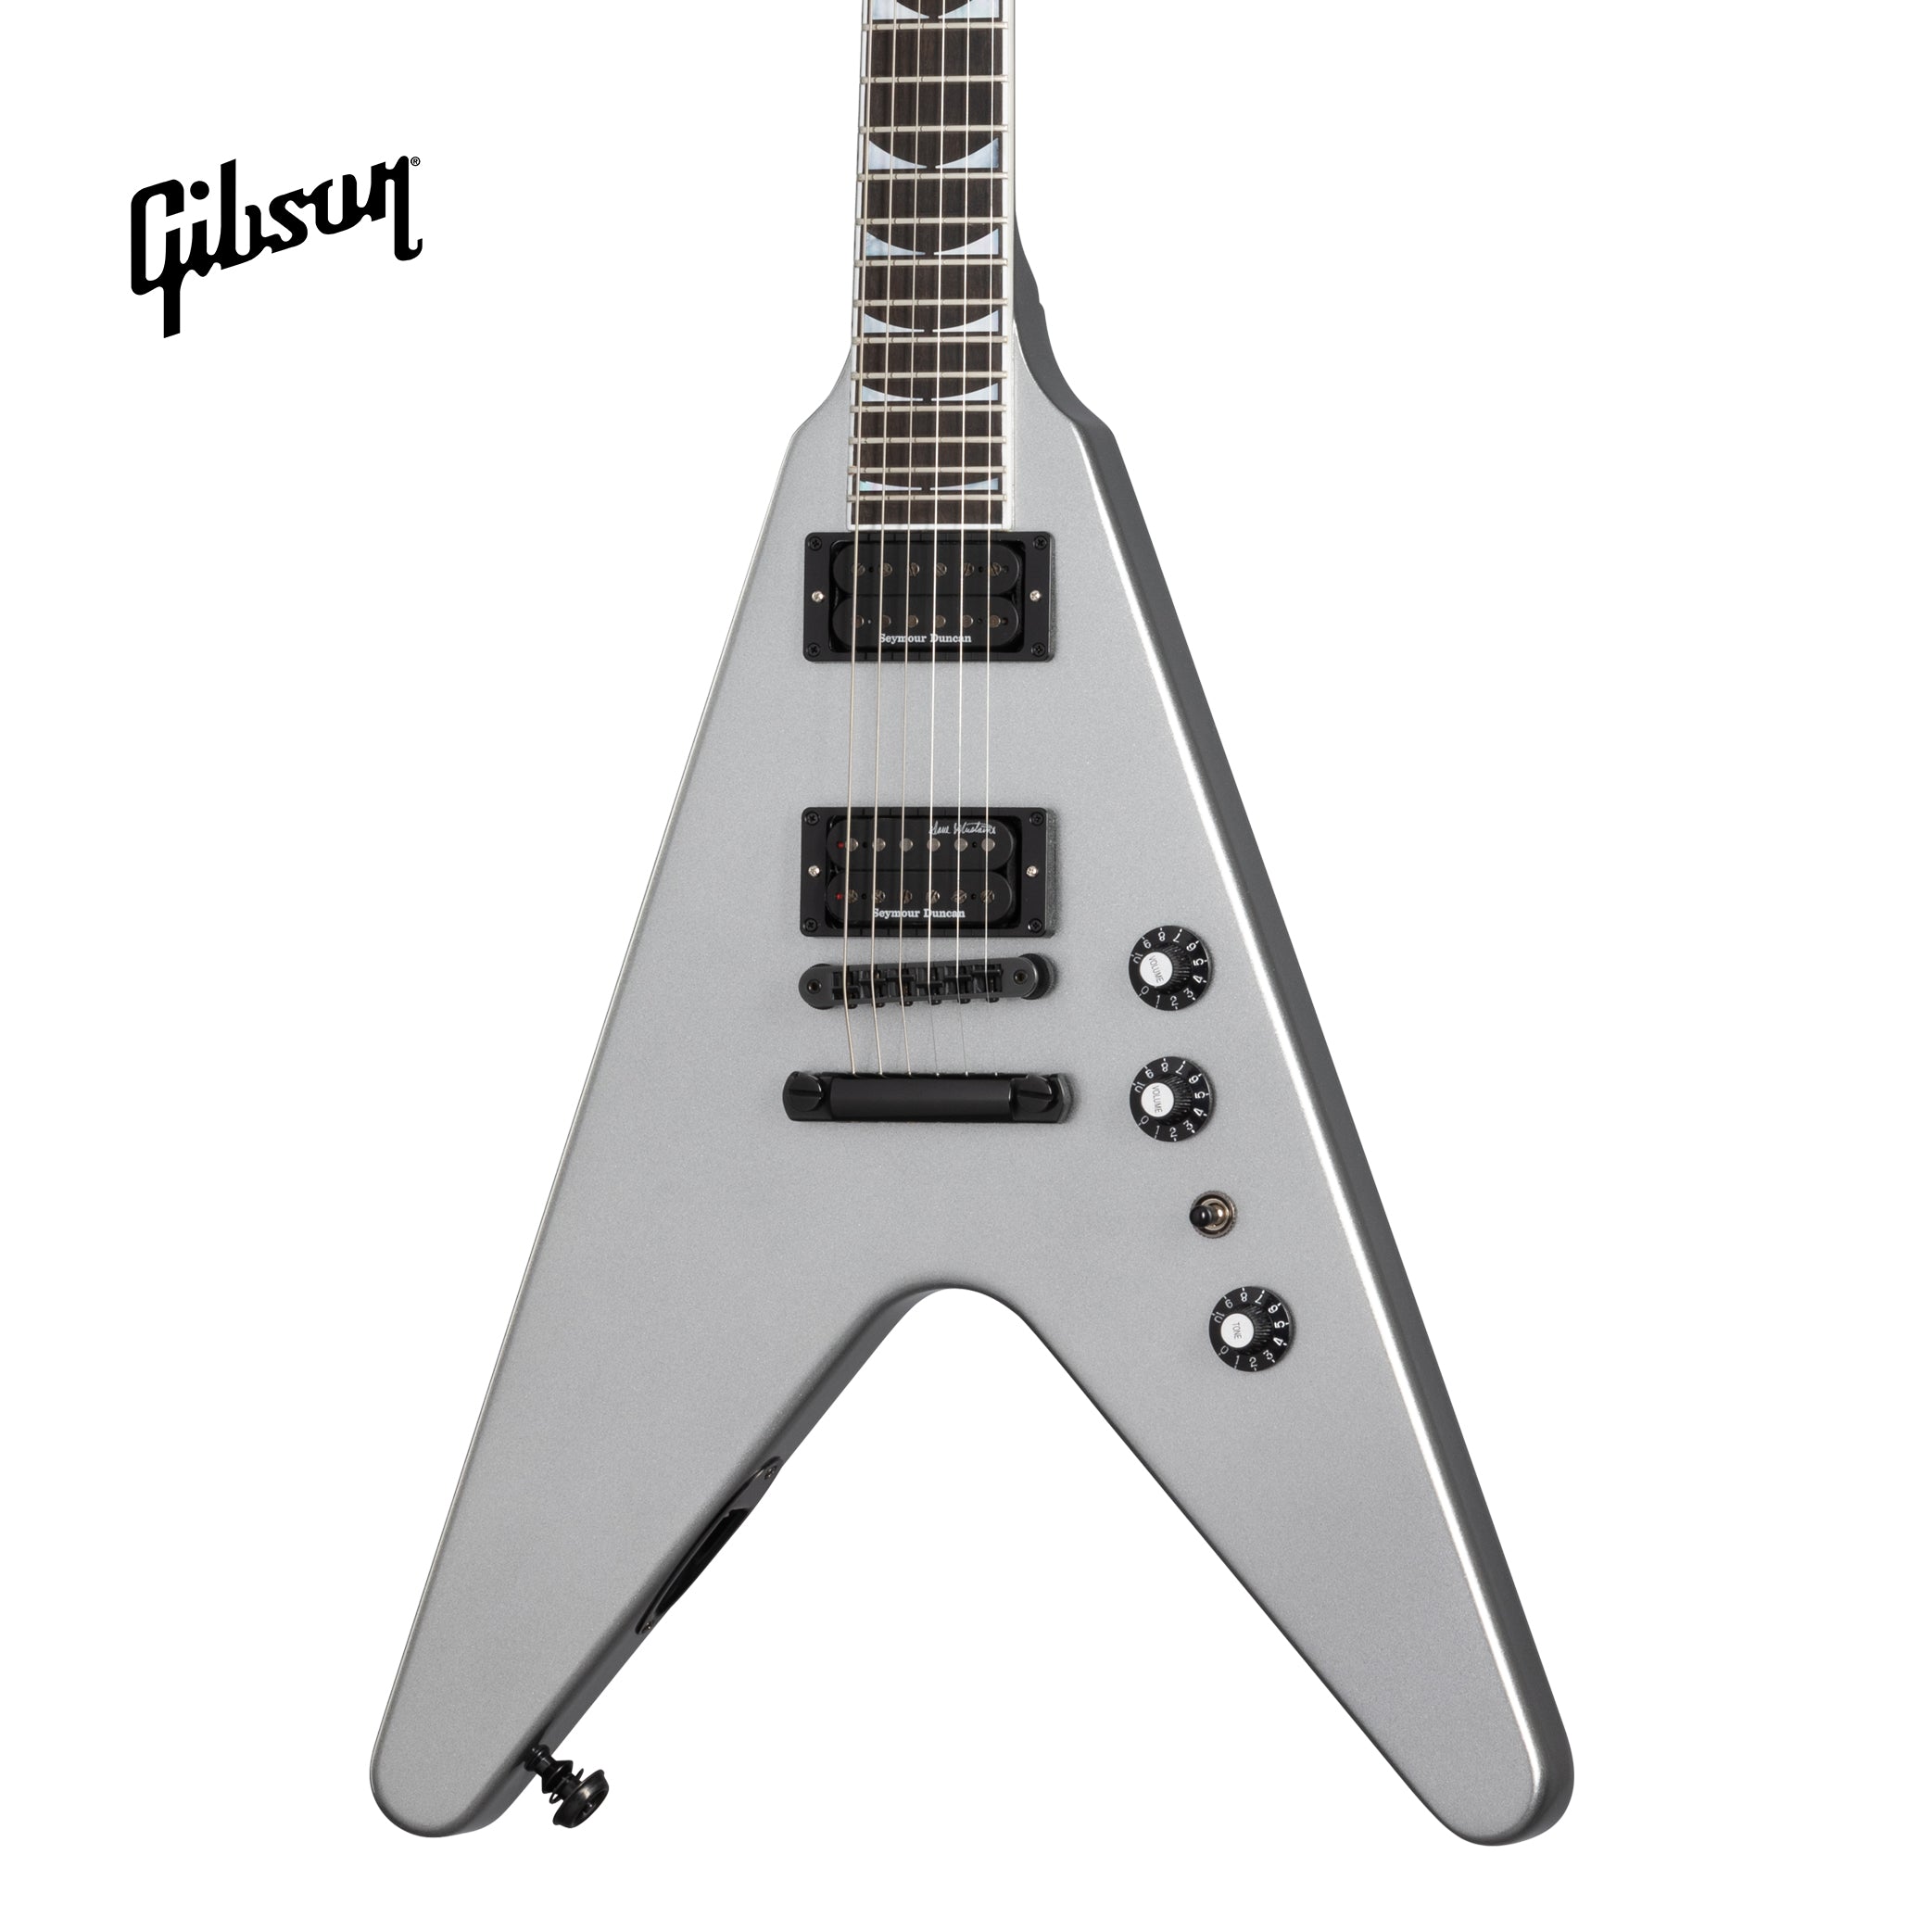 GIBSON DAVE MUSTAINE FLYING V EXP ELECTRIC GUITAR - SILVER METALLIC